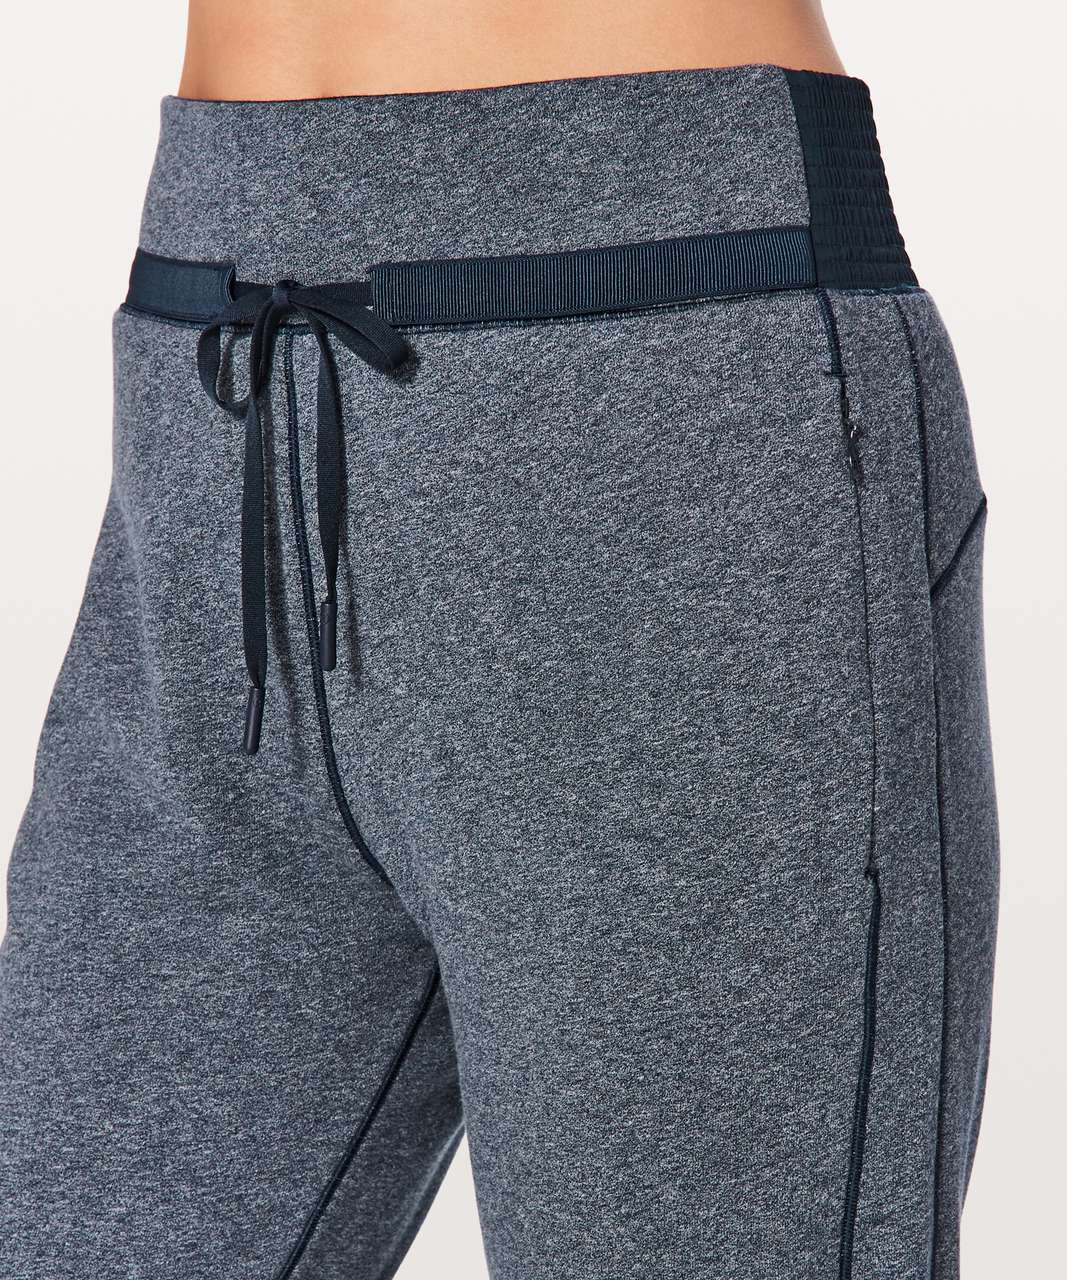 Lululemon Cool & Collected Jogger *28" - Heathered Speckled True Navy